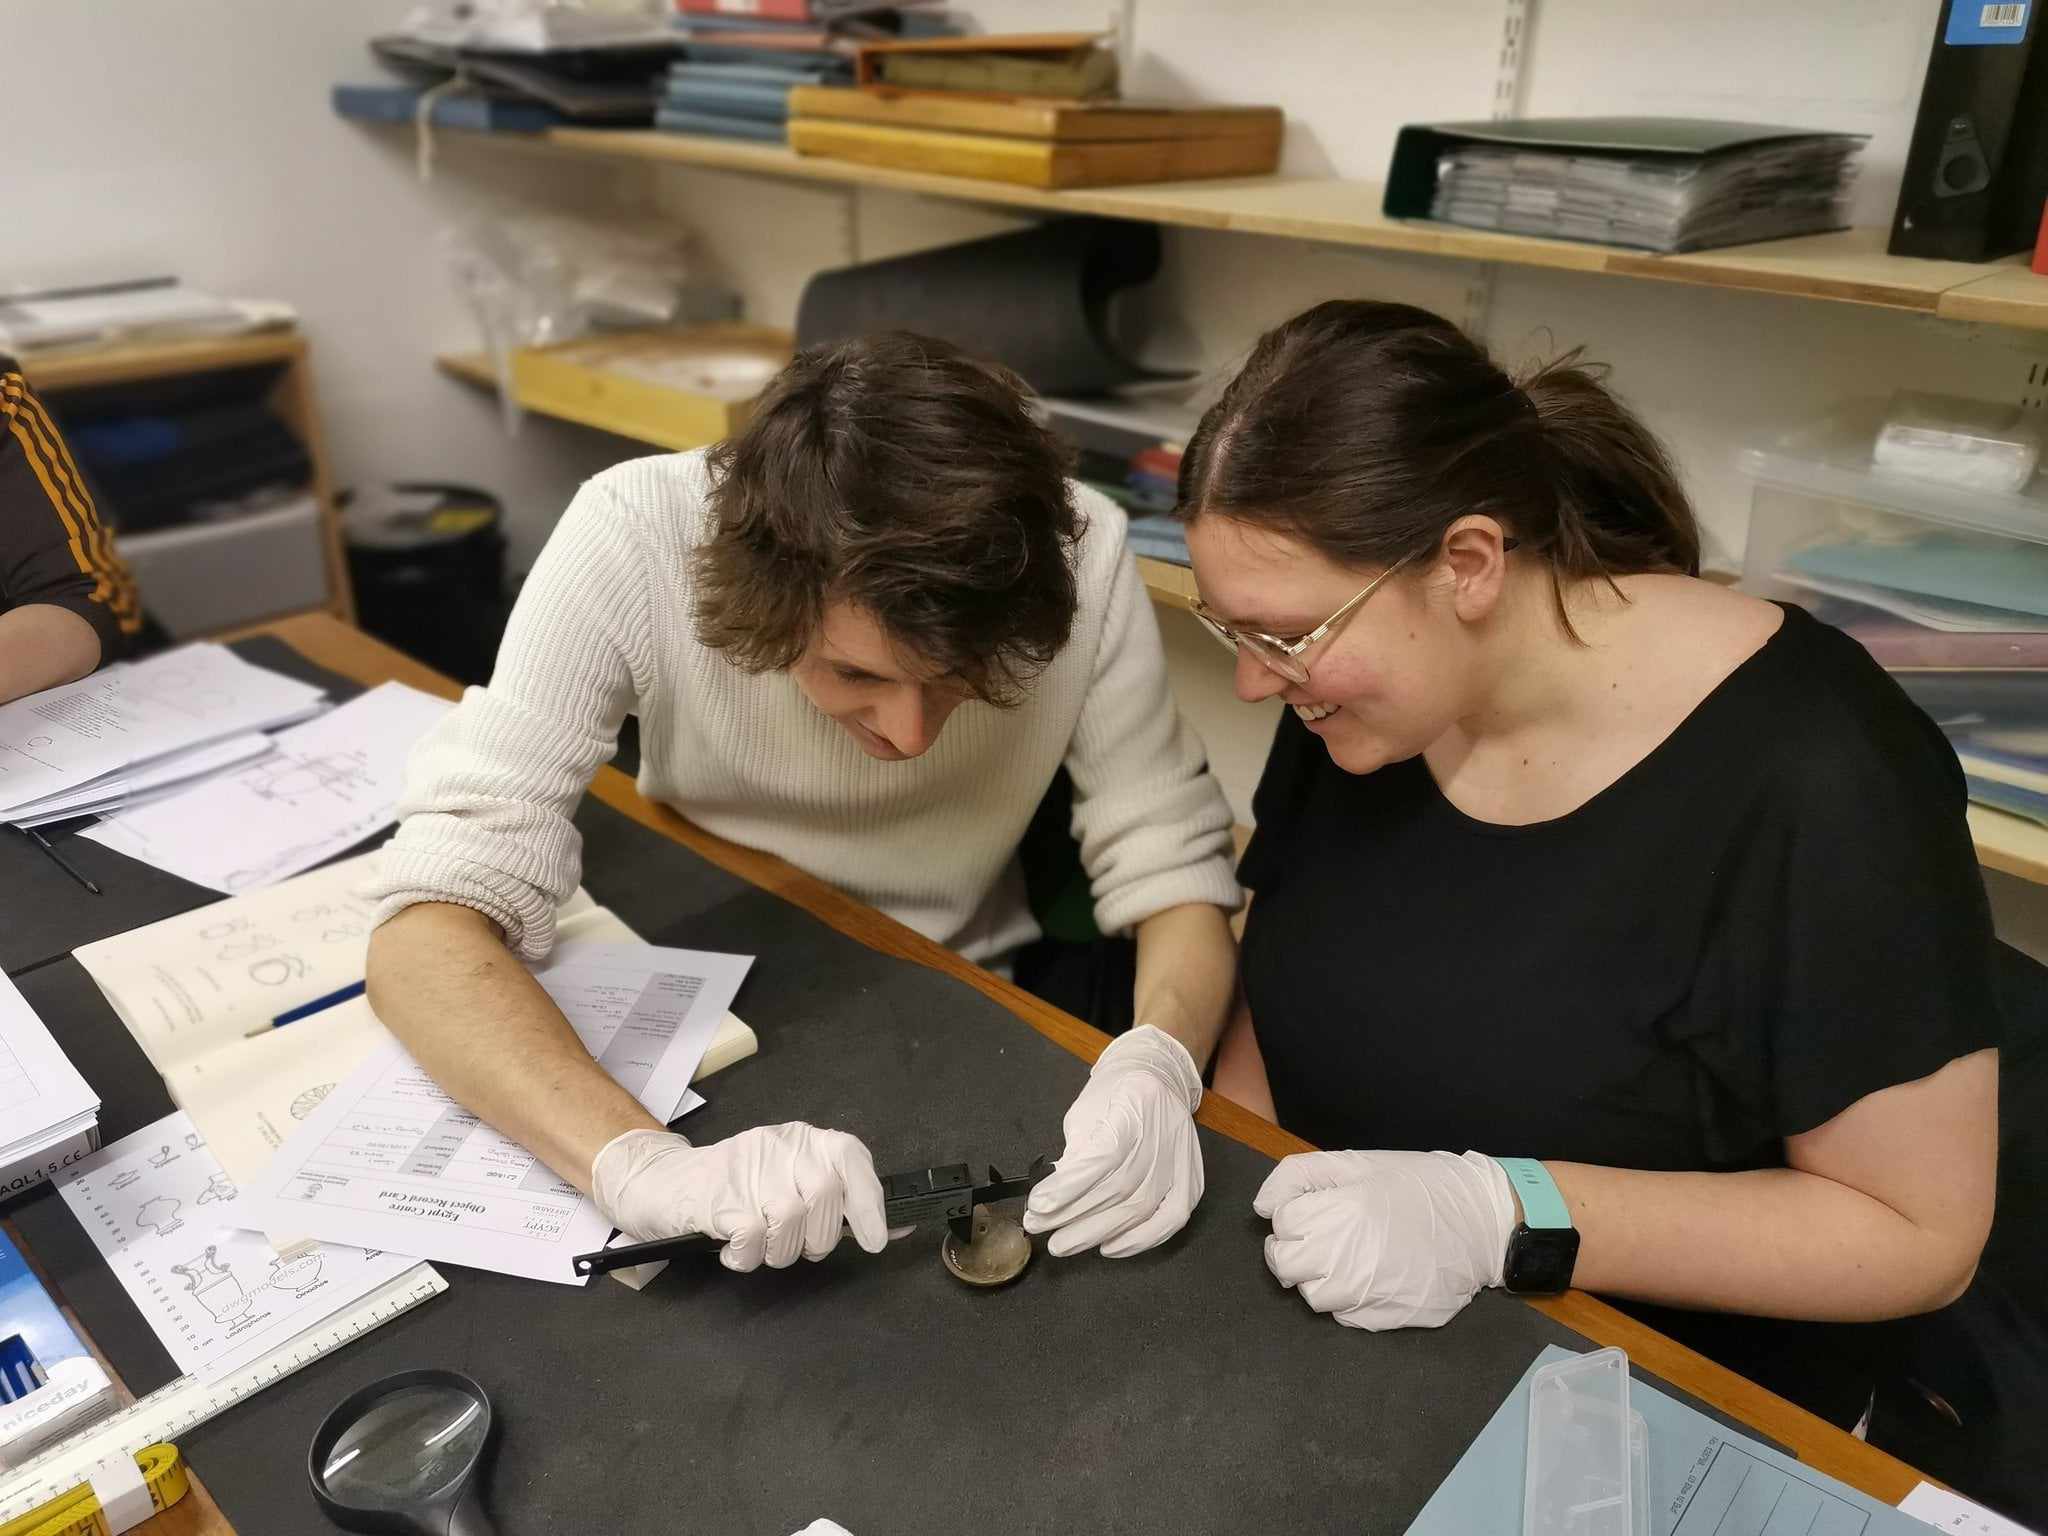 Molly Osborne has launched an exciting new career as an Egyptologist. Molly and her fellow students researching into Cypriot vessels